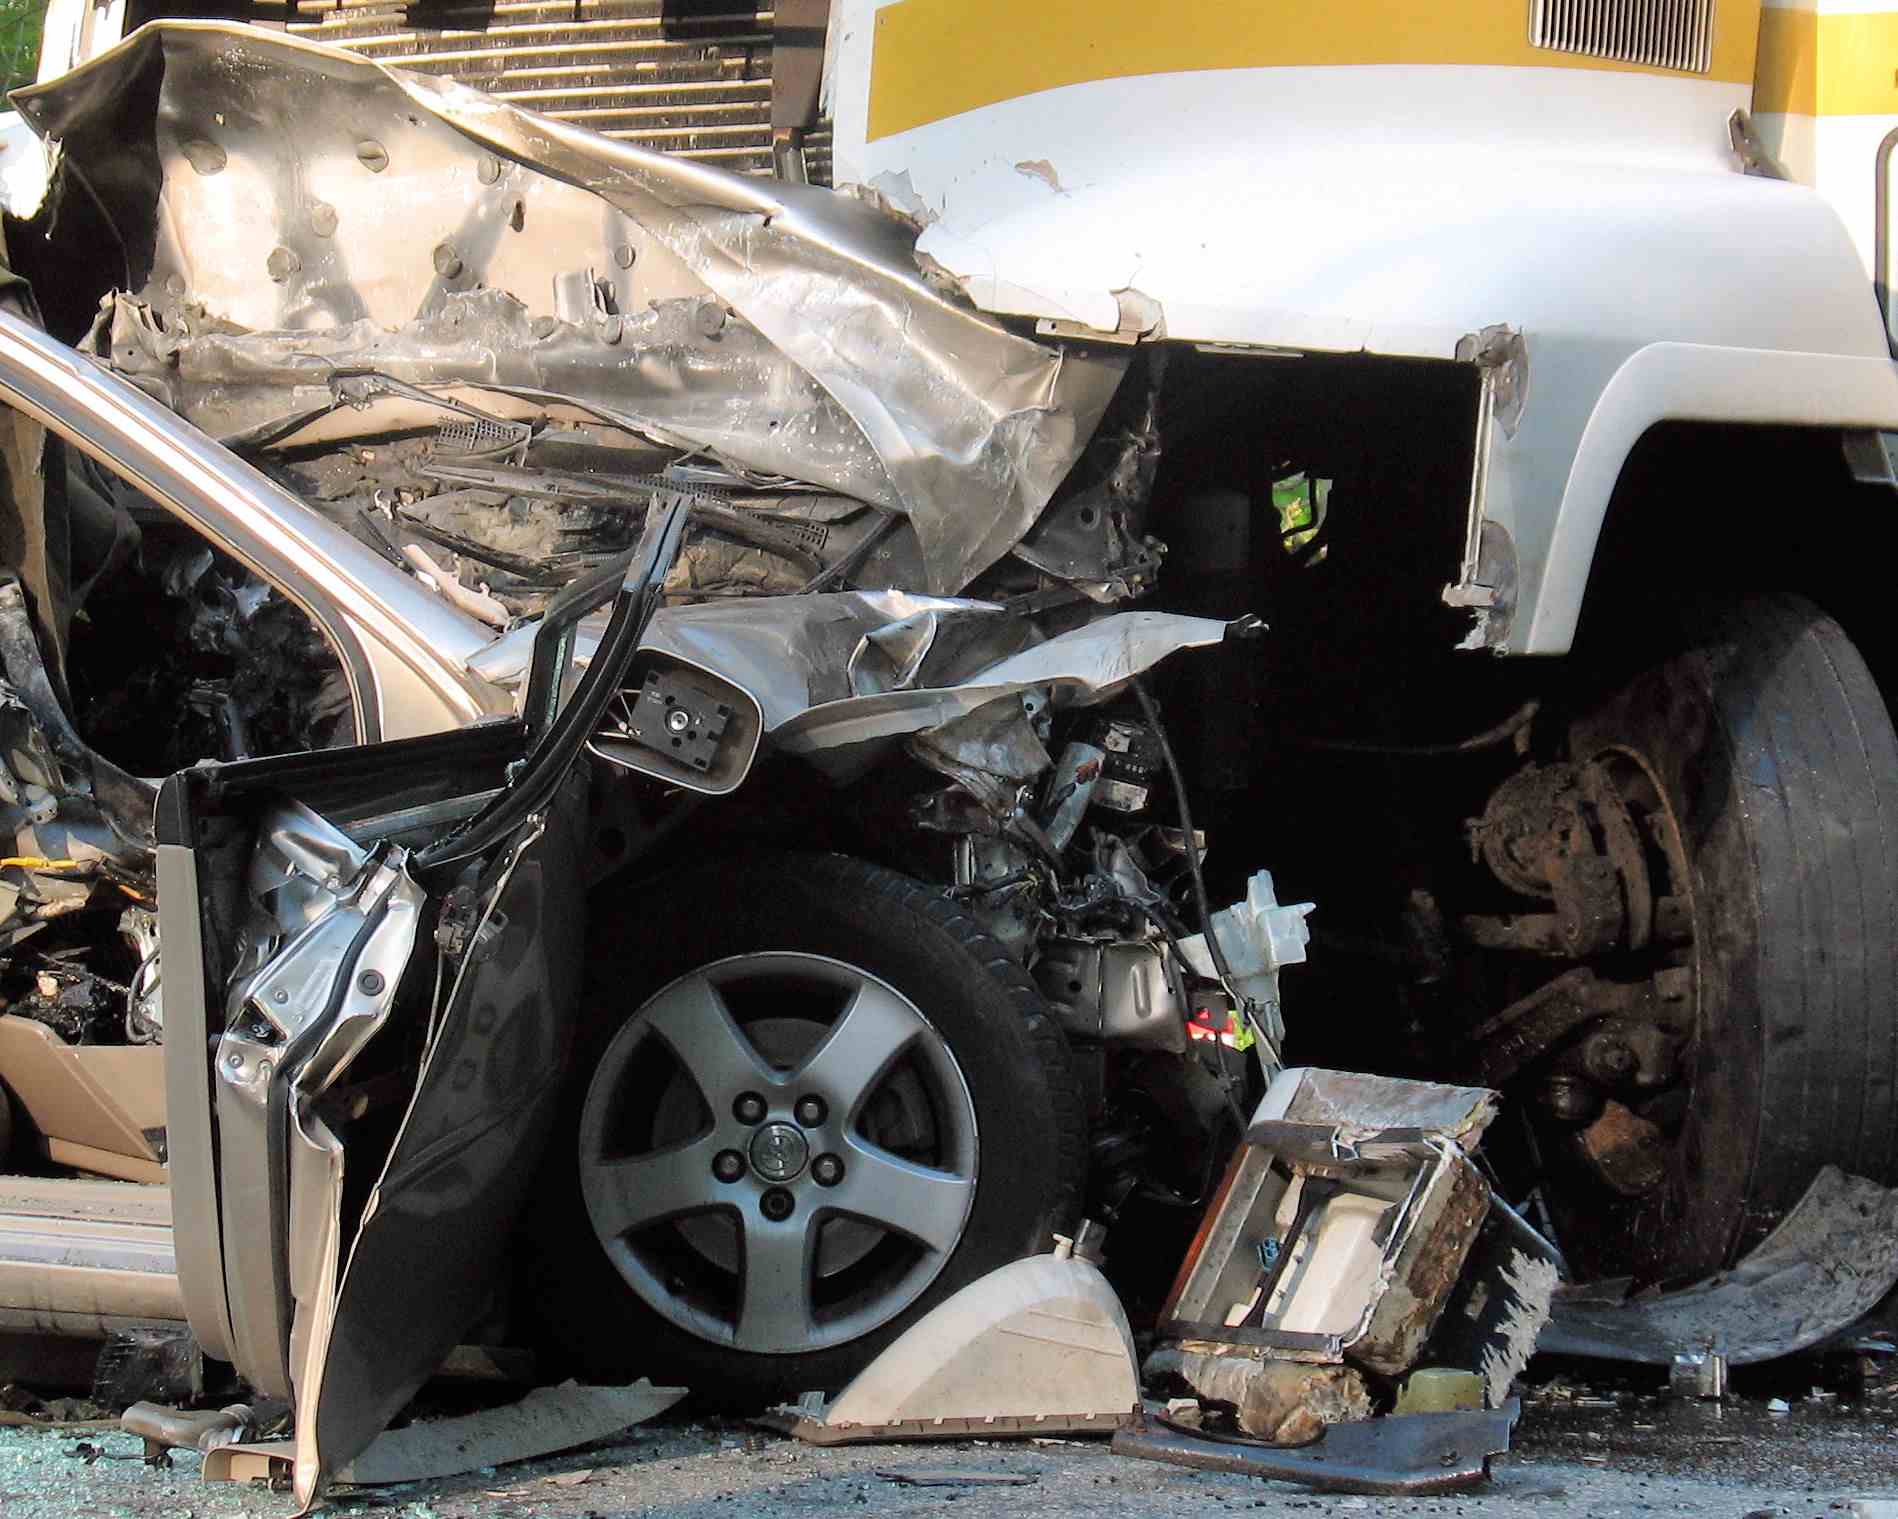 A multi-car crash can result in substantial property damage and catastrophic injury.